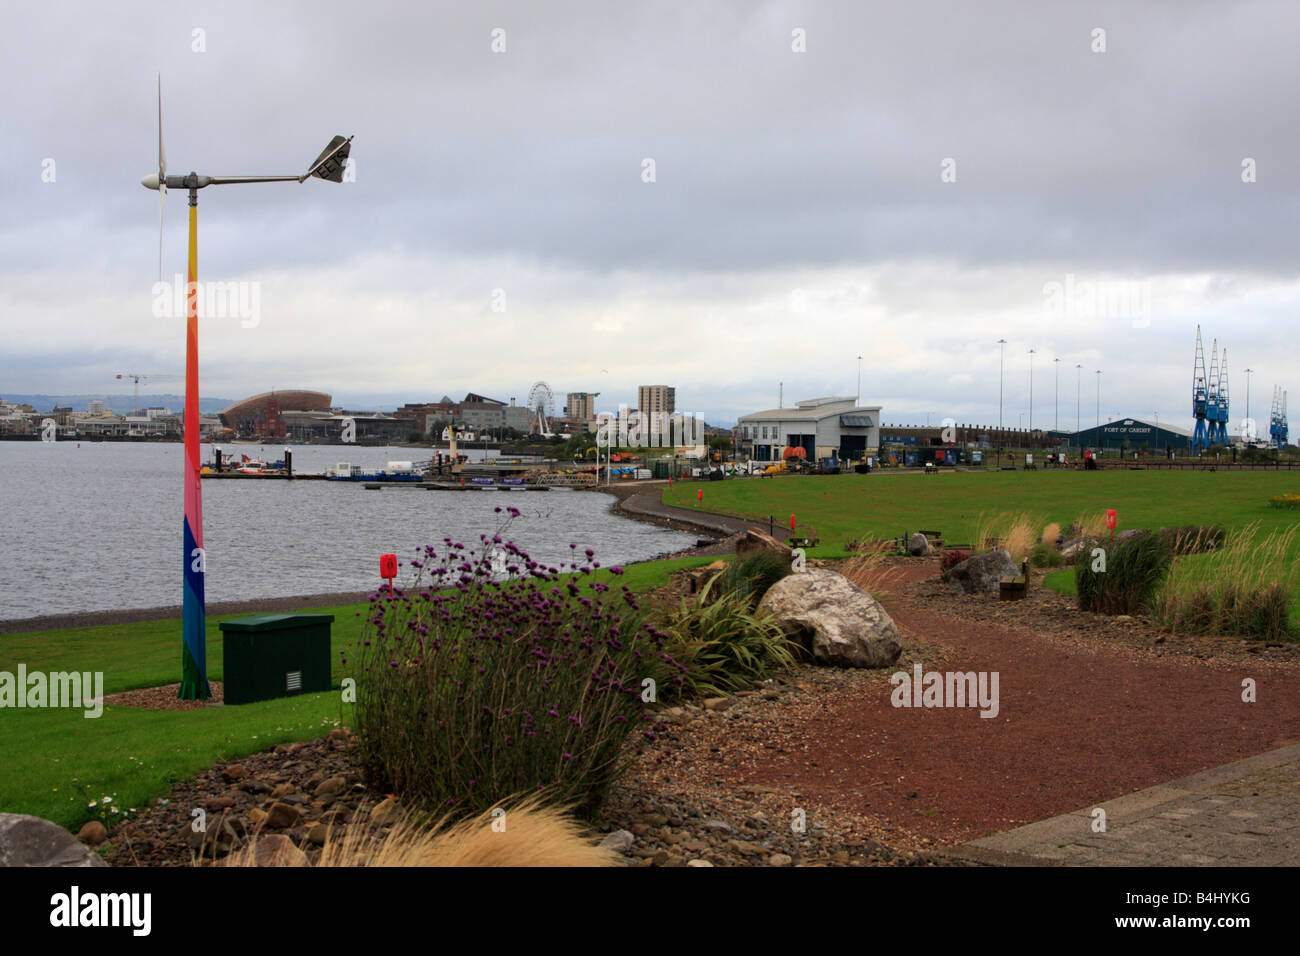 Looking back towards Cardiff from the Cardiff Bay Barrage, Wales, U.K. Stock Photo